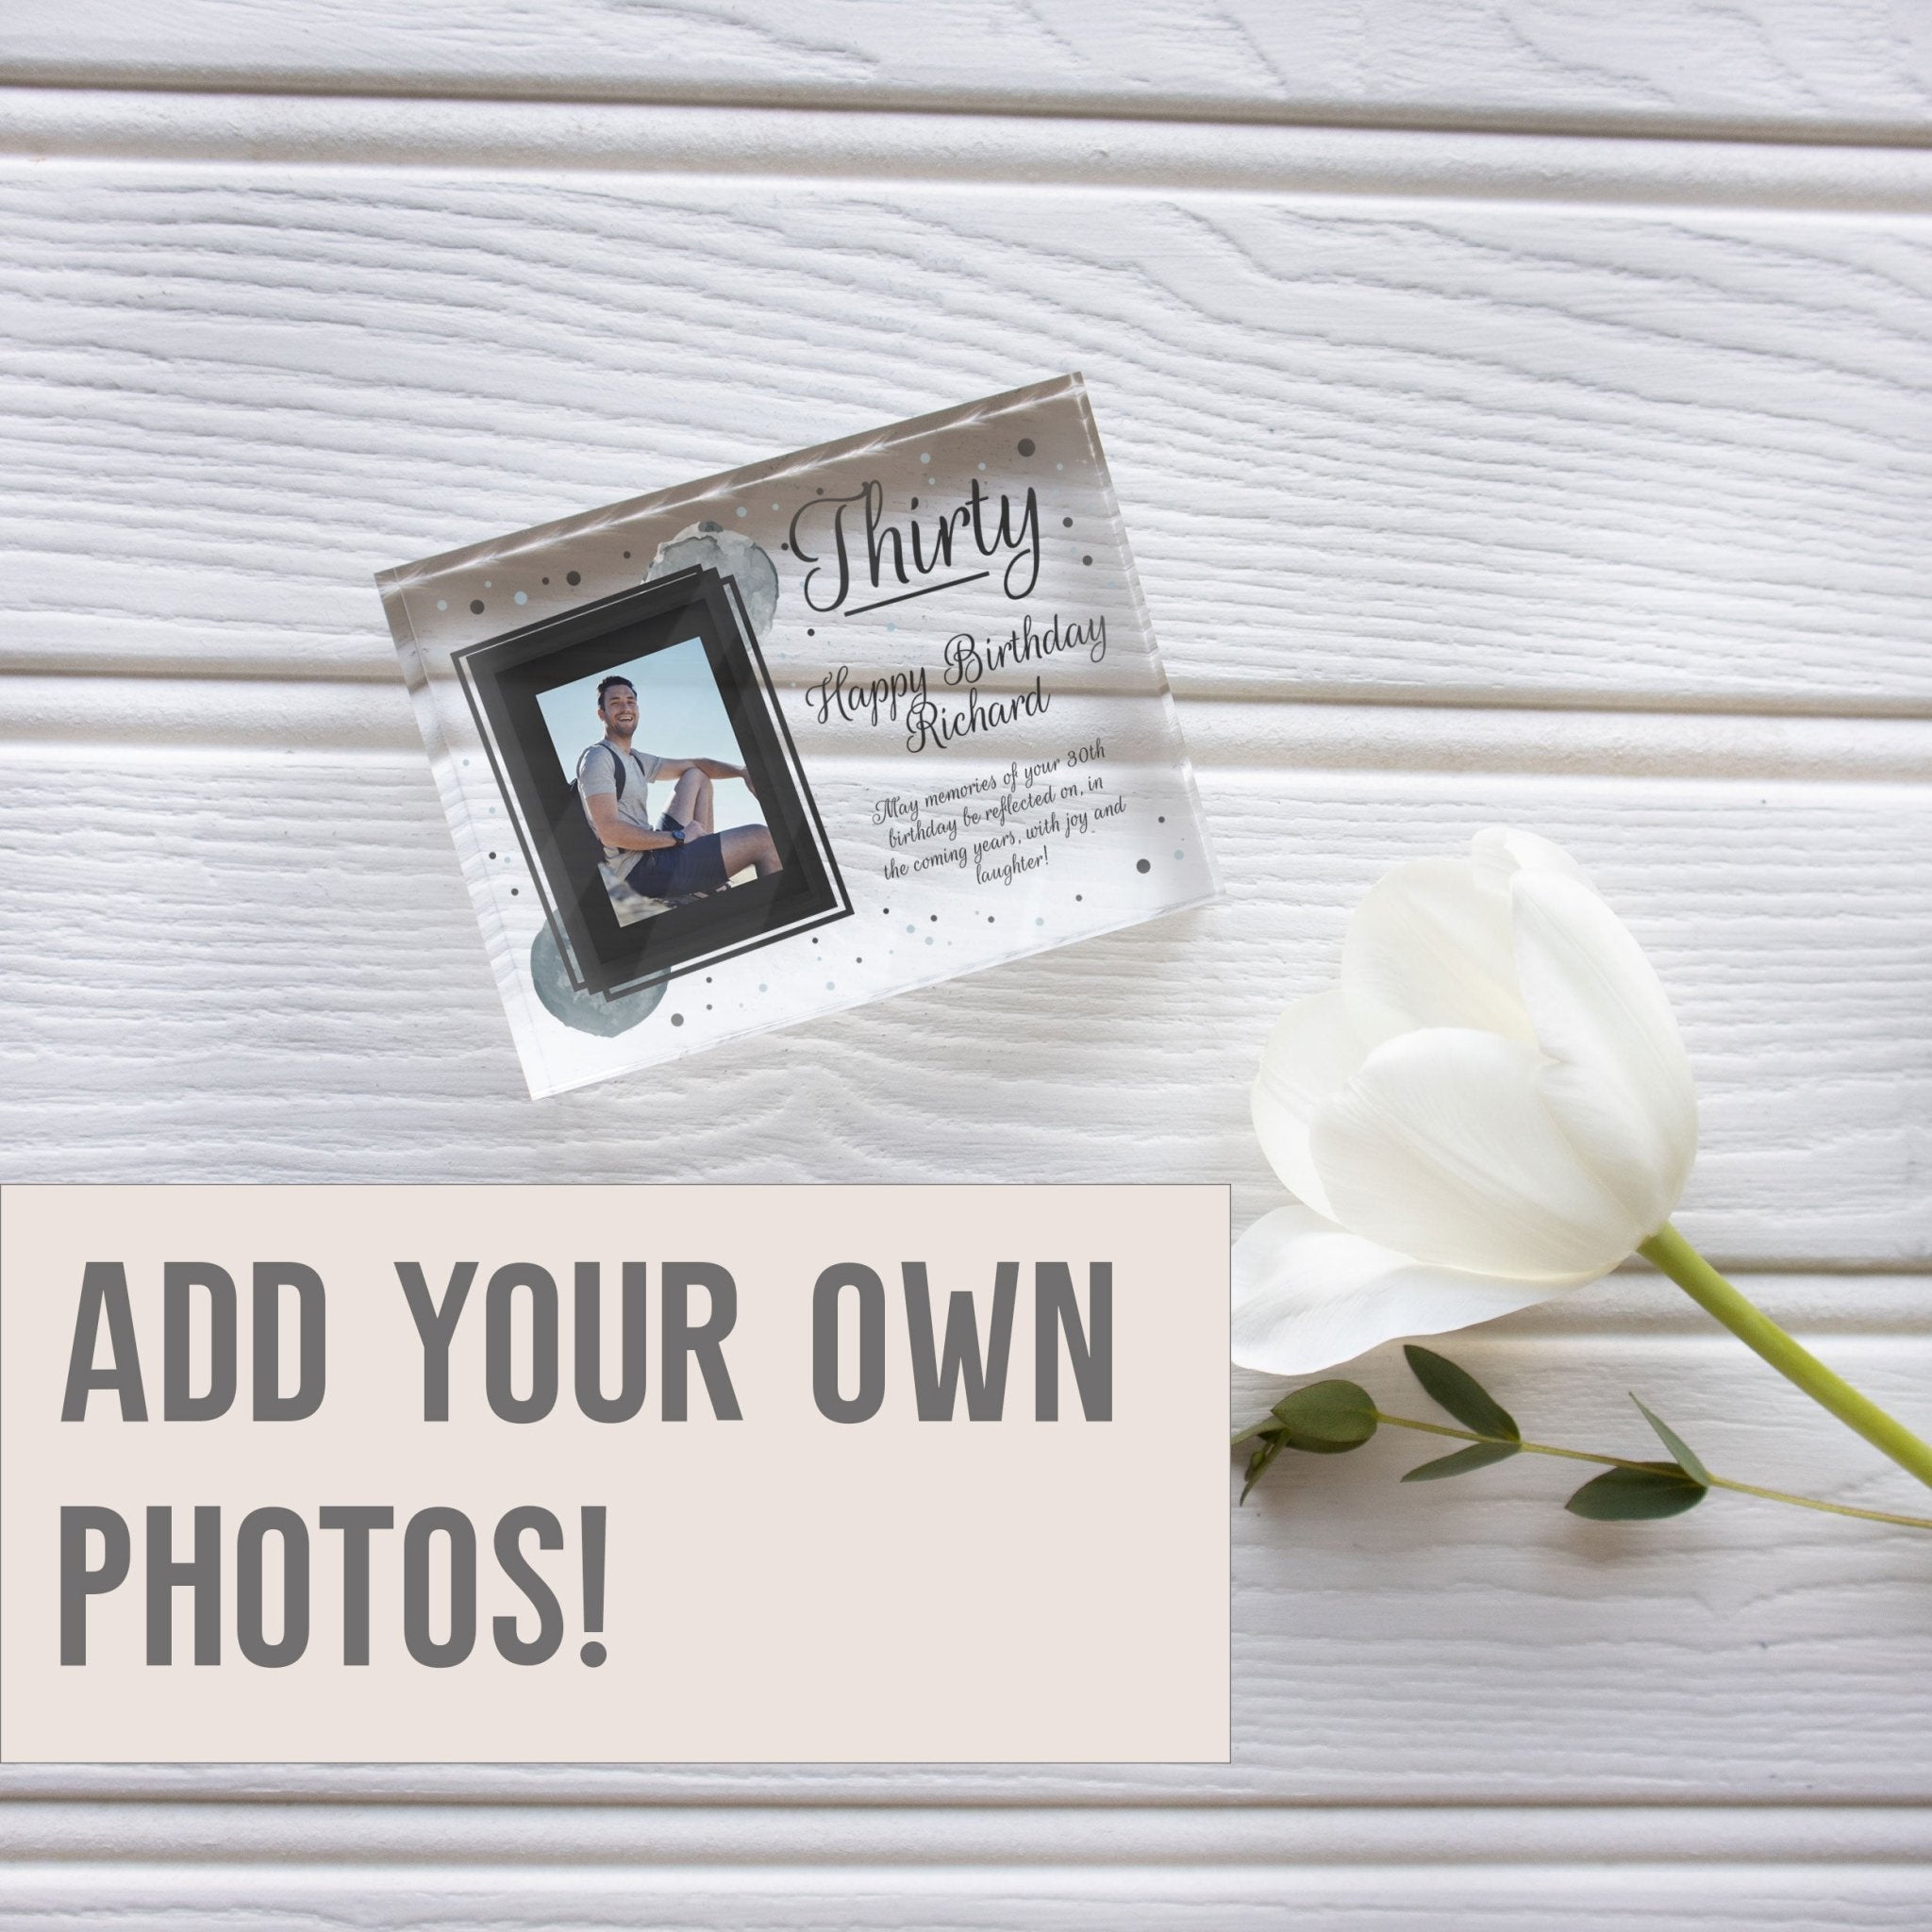 Custom 30th Birthday Photo Frame Gift For Friend | Personalized 30th Birthday Gift For Him | 30th Birthday Picture Frame PhotoBlock - Unique Prints